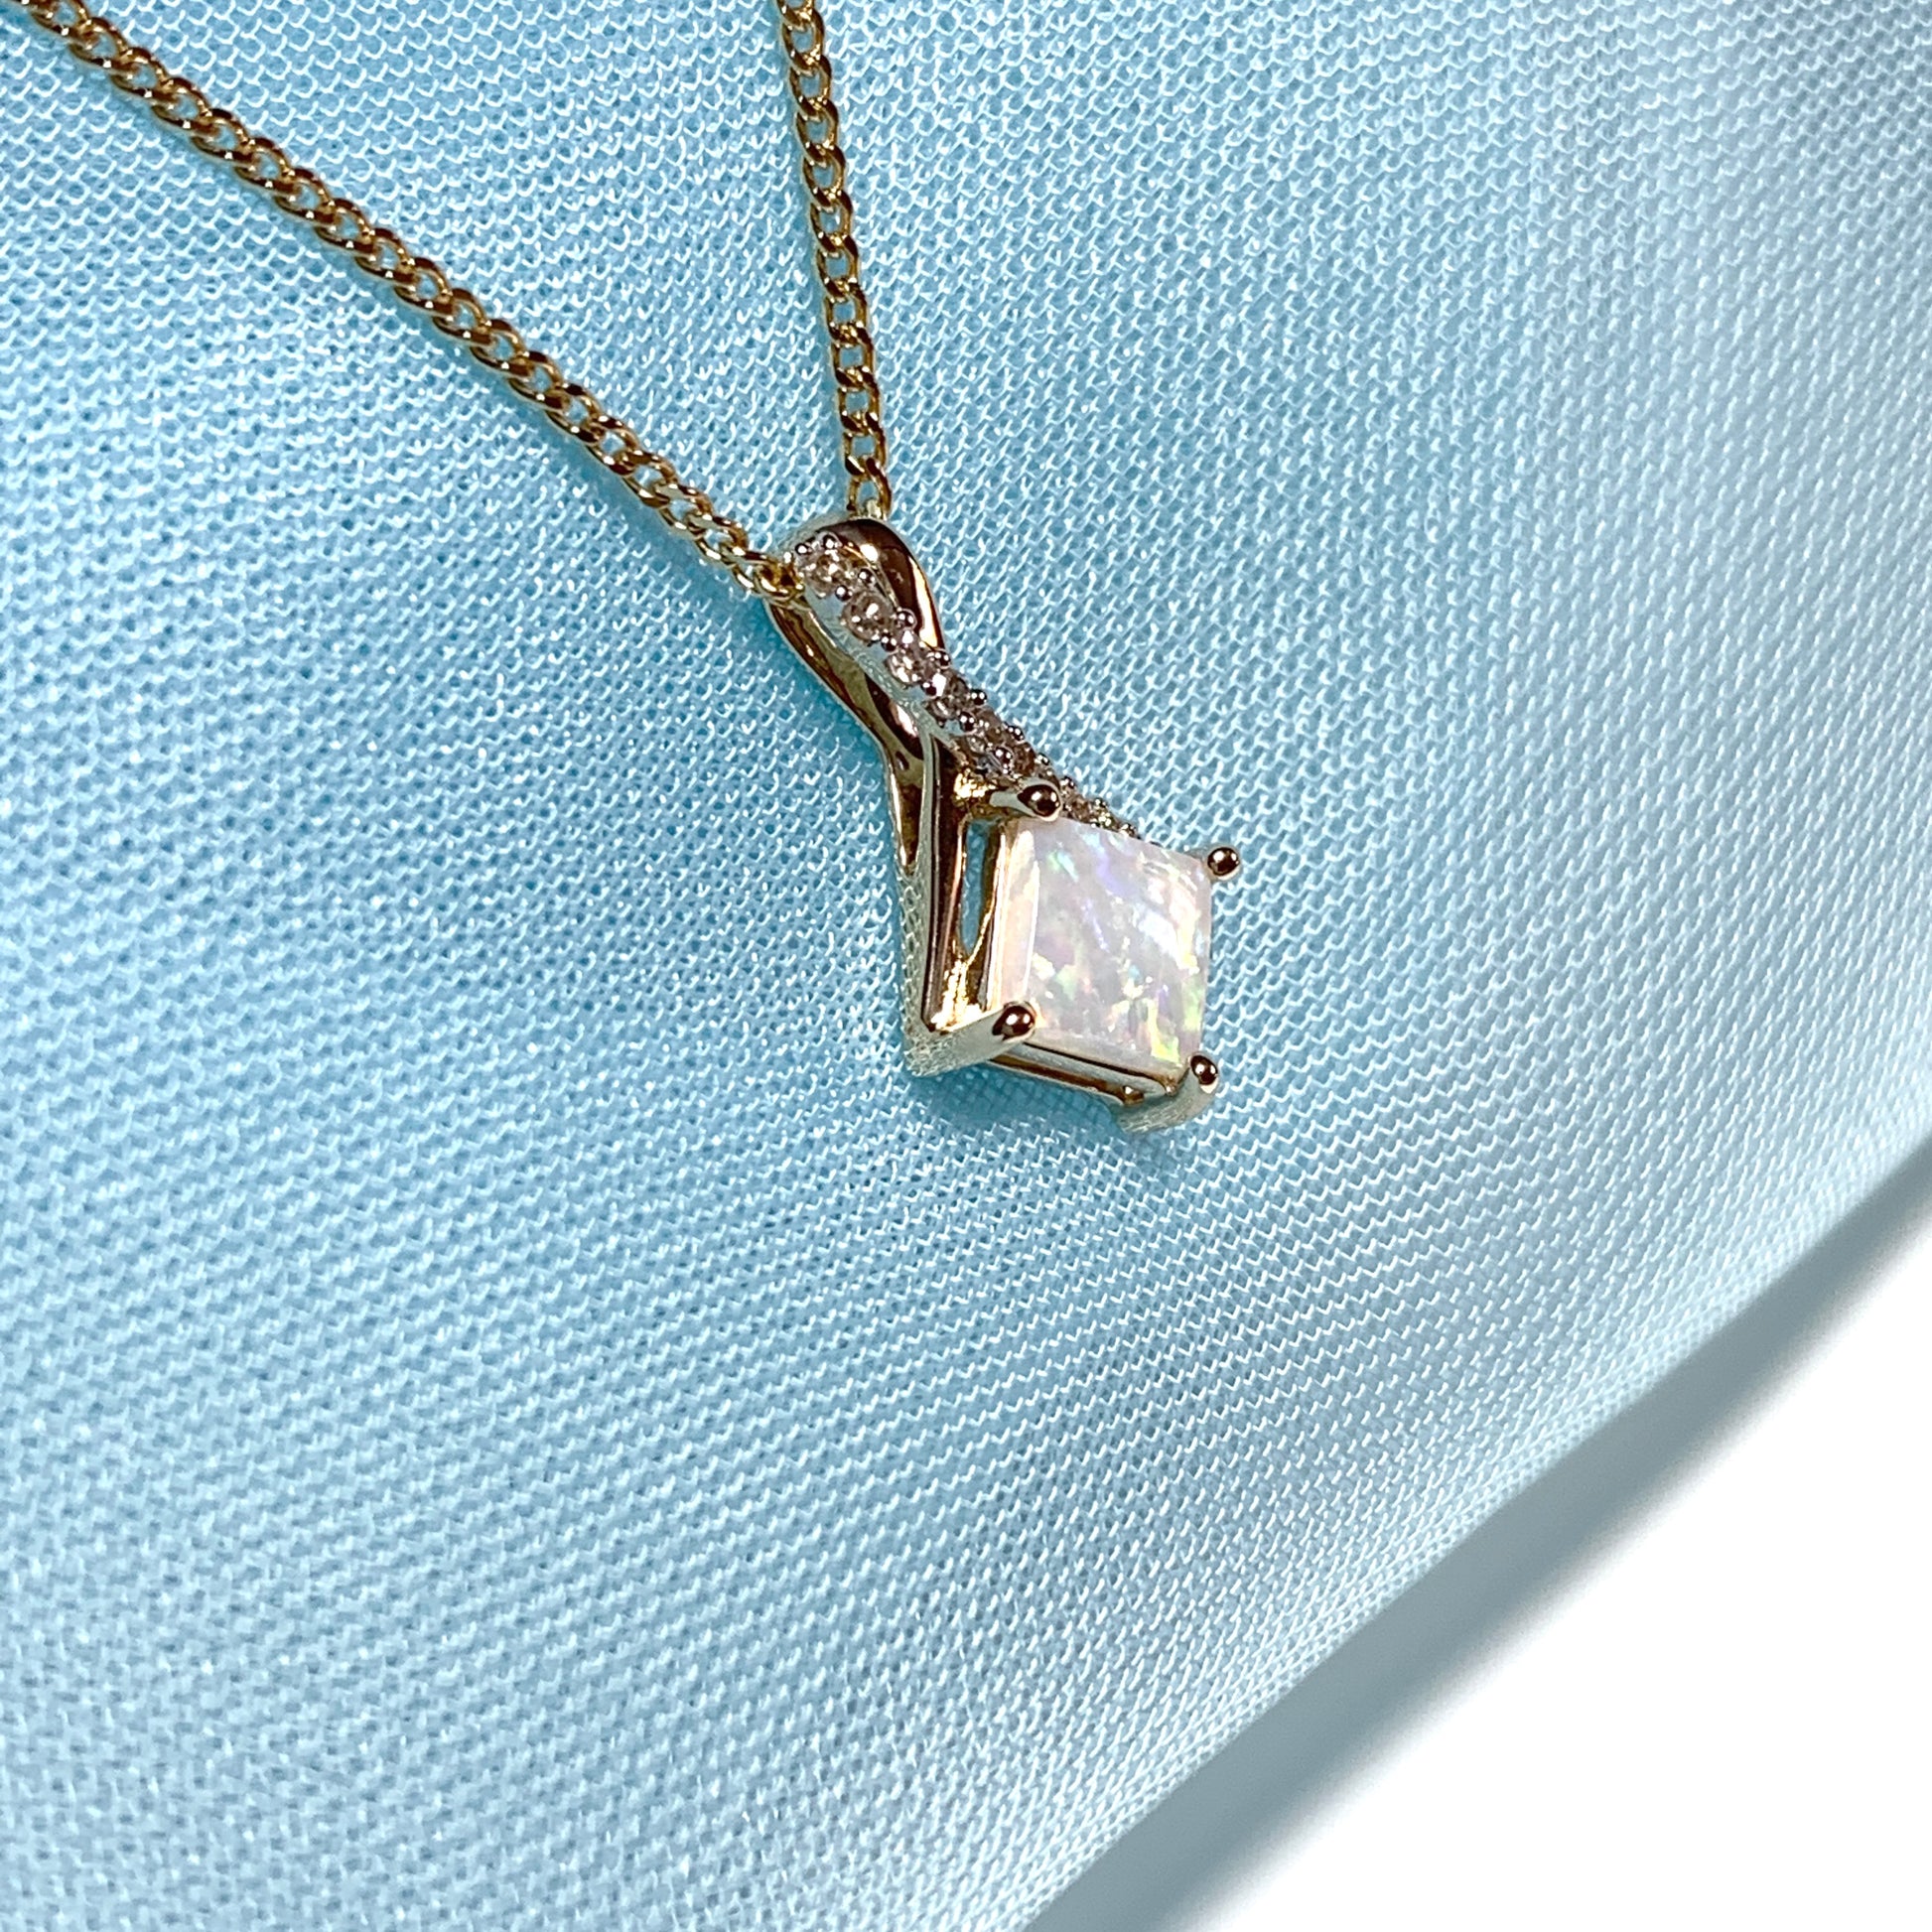 Gold opal and diamond necklace pendent